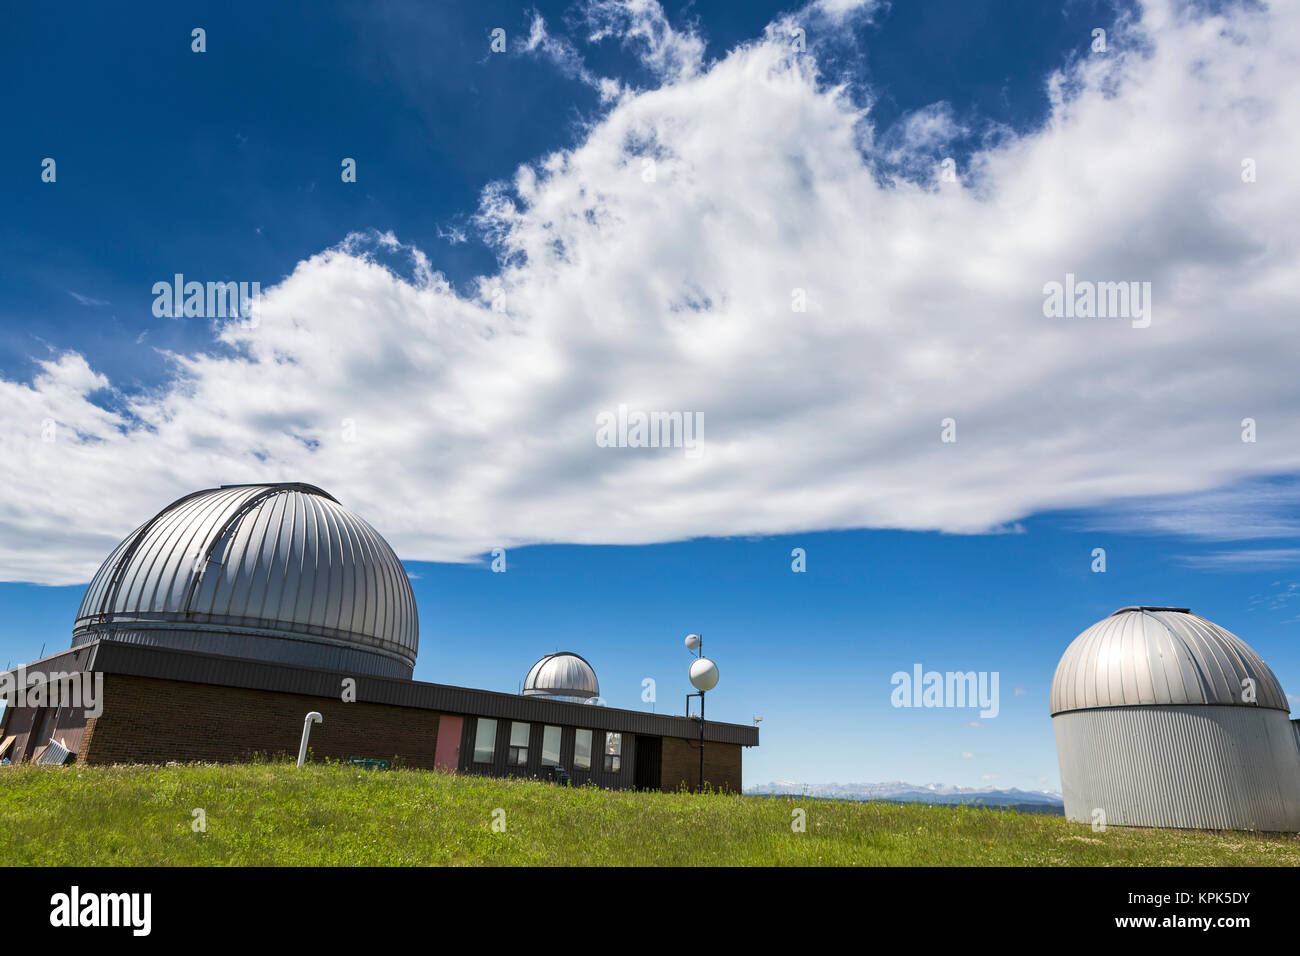 Domes of Astrophysical Observatory with dramatic clouds and blue sky, Southwest of Calgary; Alberta, Canada Stock Photo